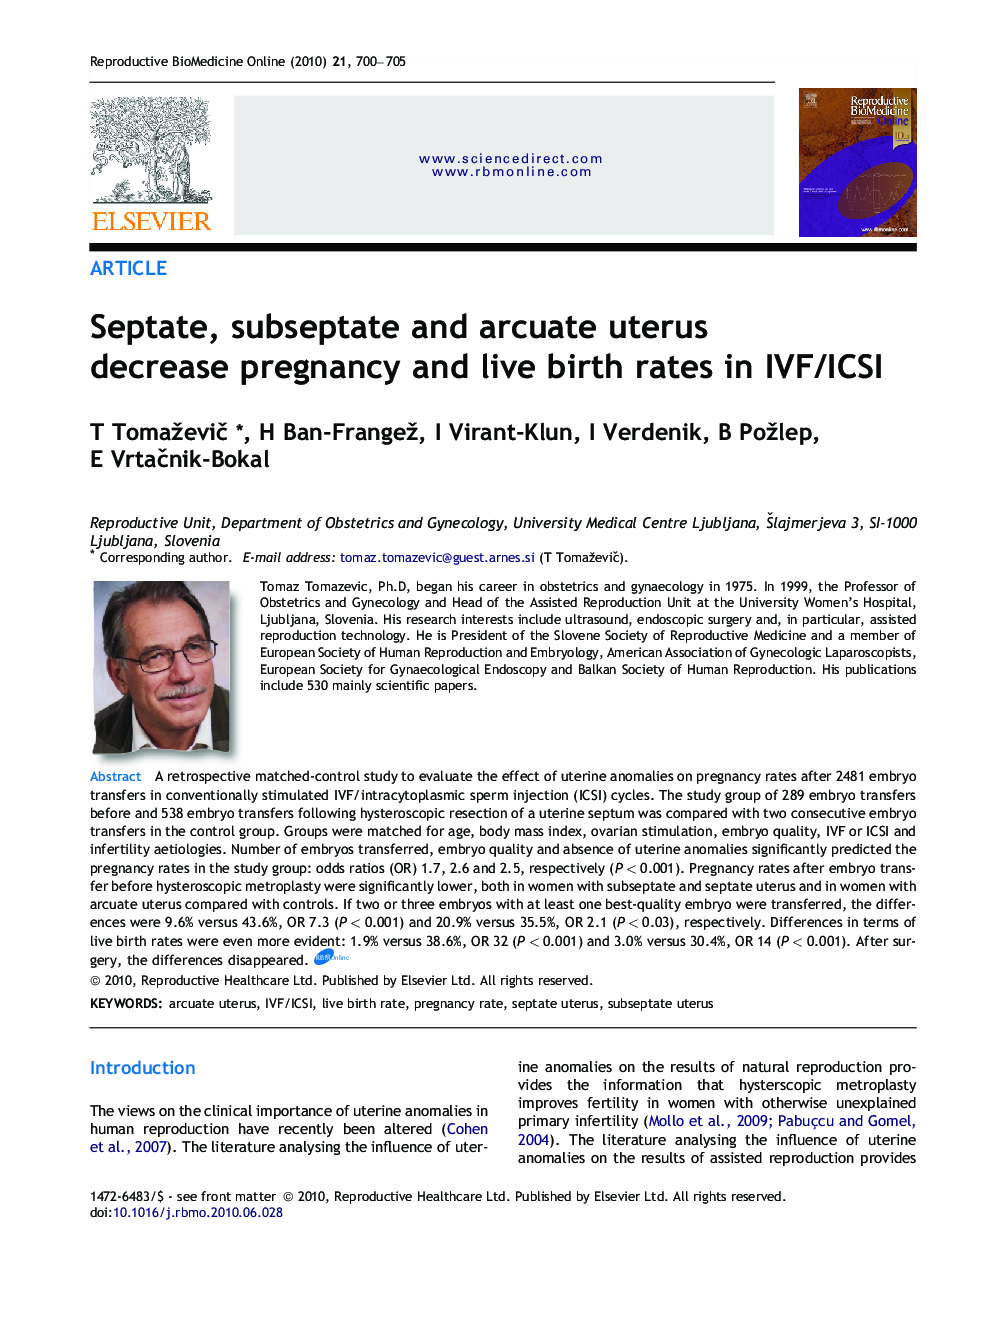 Septate, subseptate and arcuate uterus decrease pregnancy and live birth rates in IVF/ICSI 